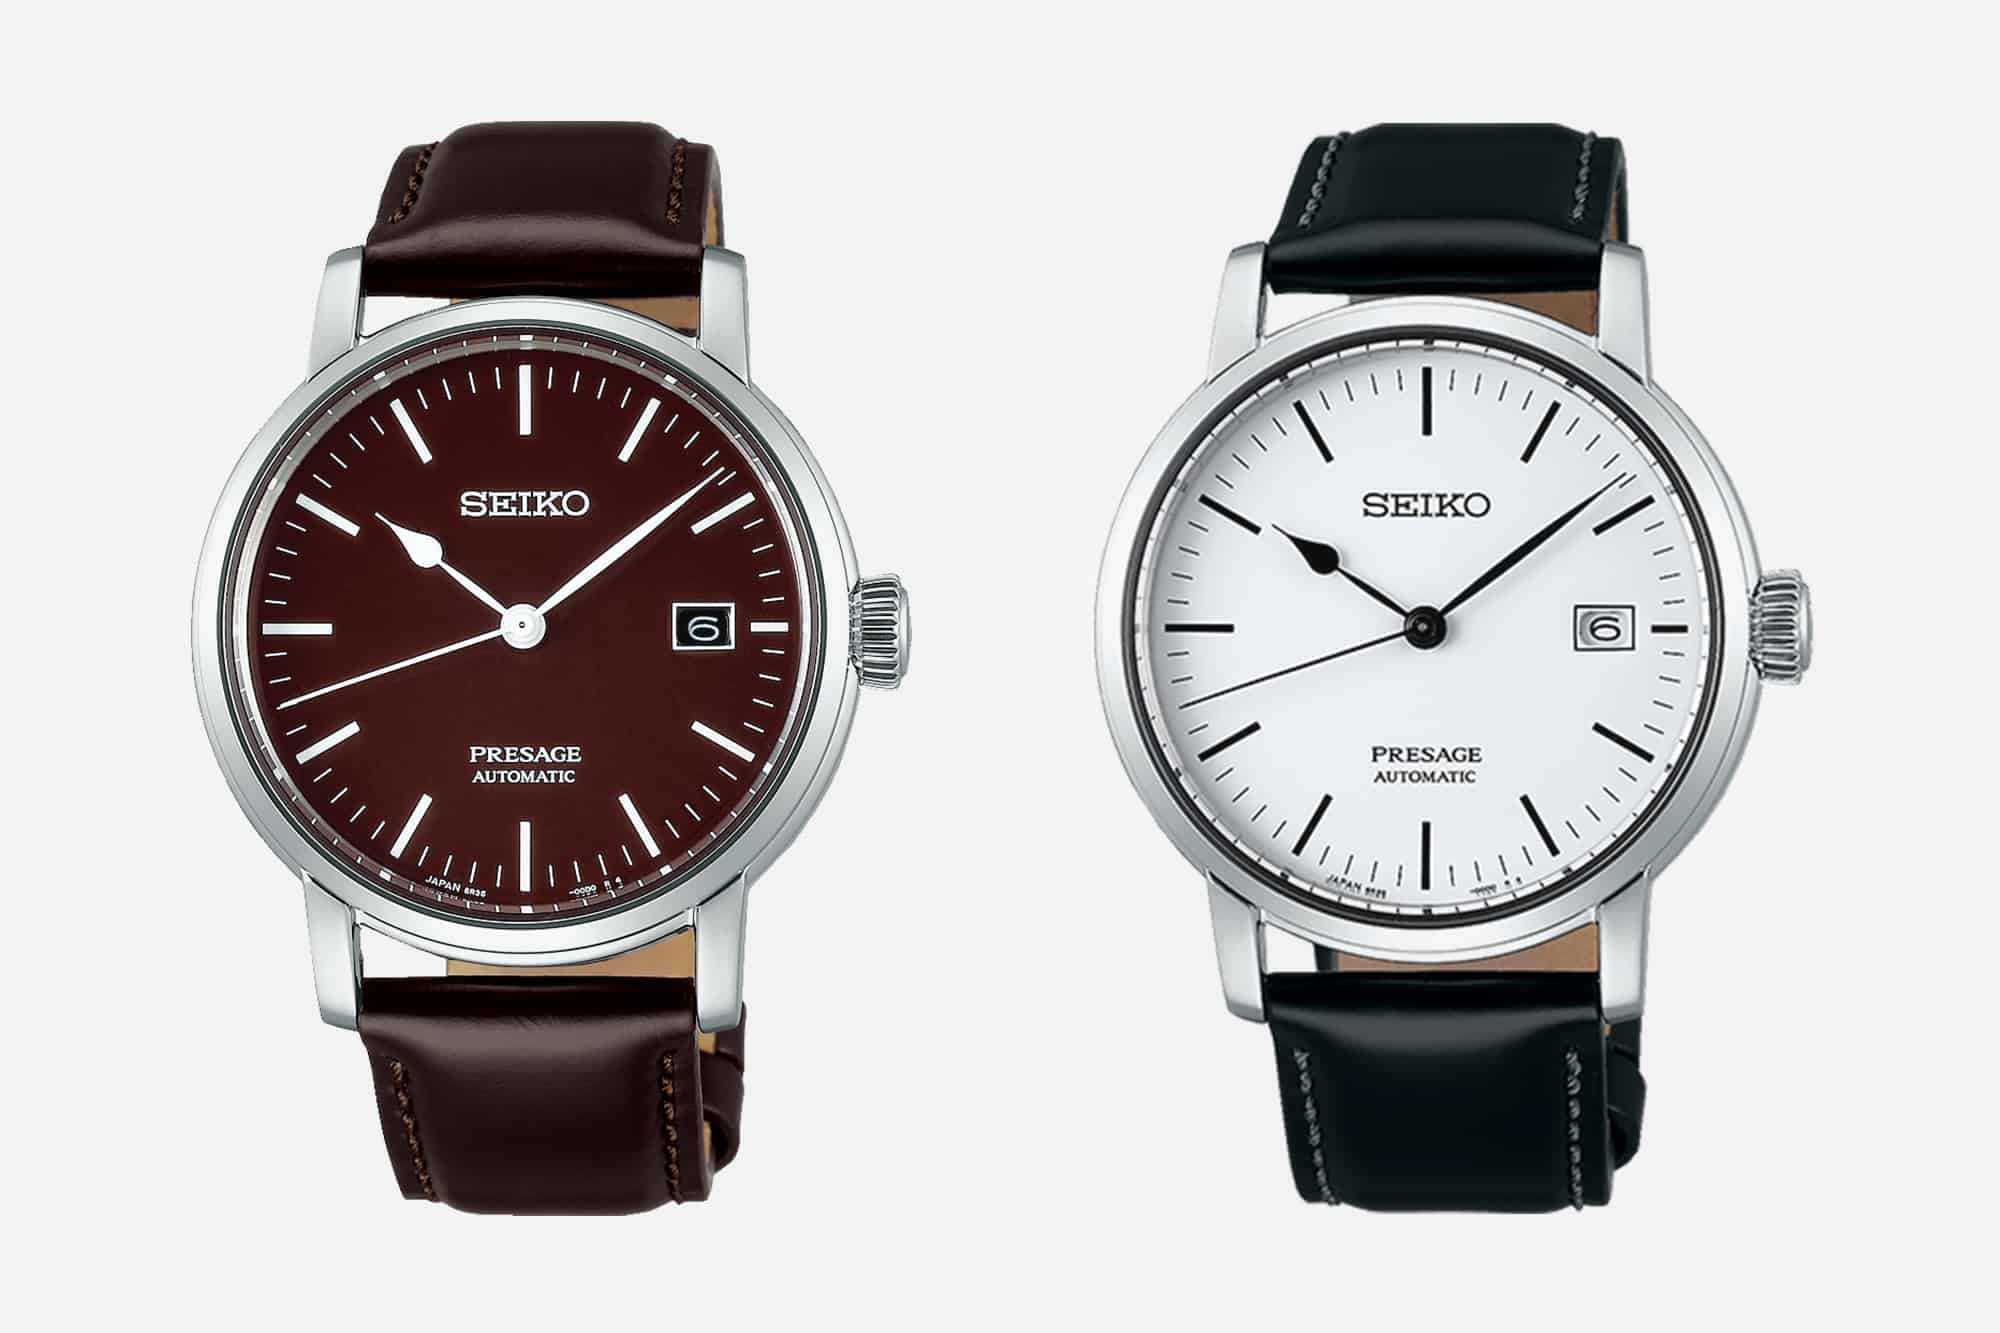 Seiko Adds Two New Riki Watanabe Inspired Watches to their Presage Line, with Enamel Dials and an Extended Power Reserve